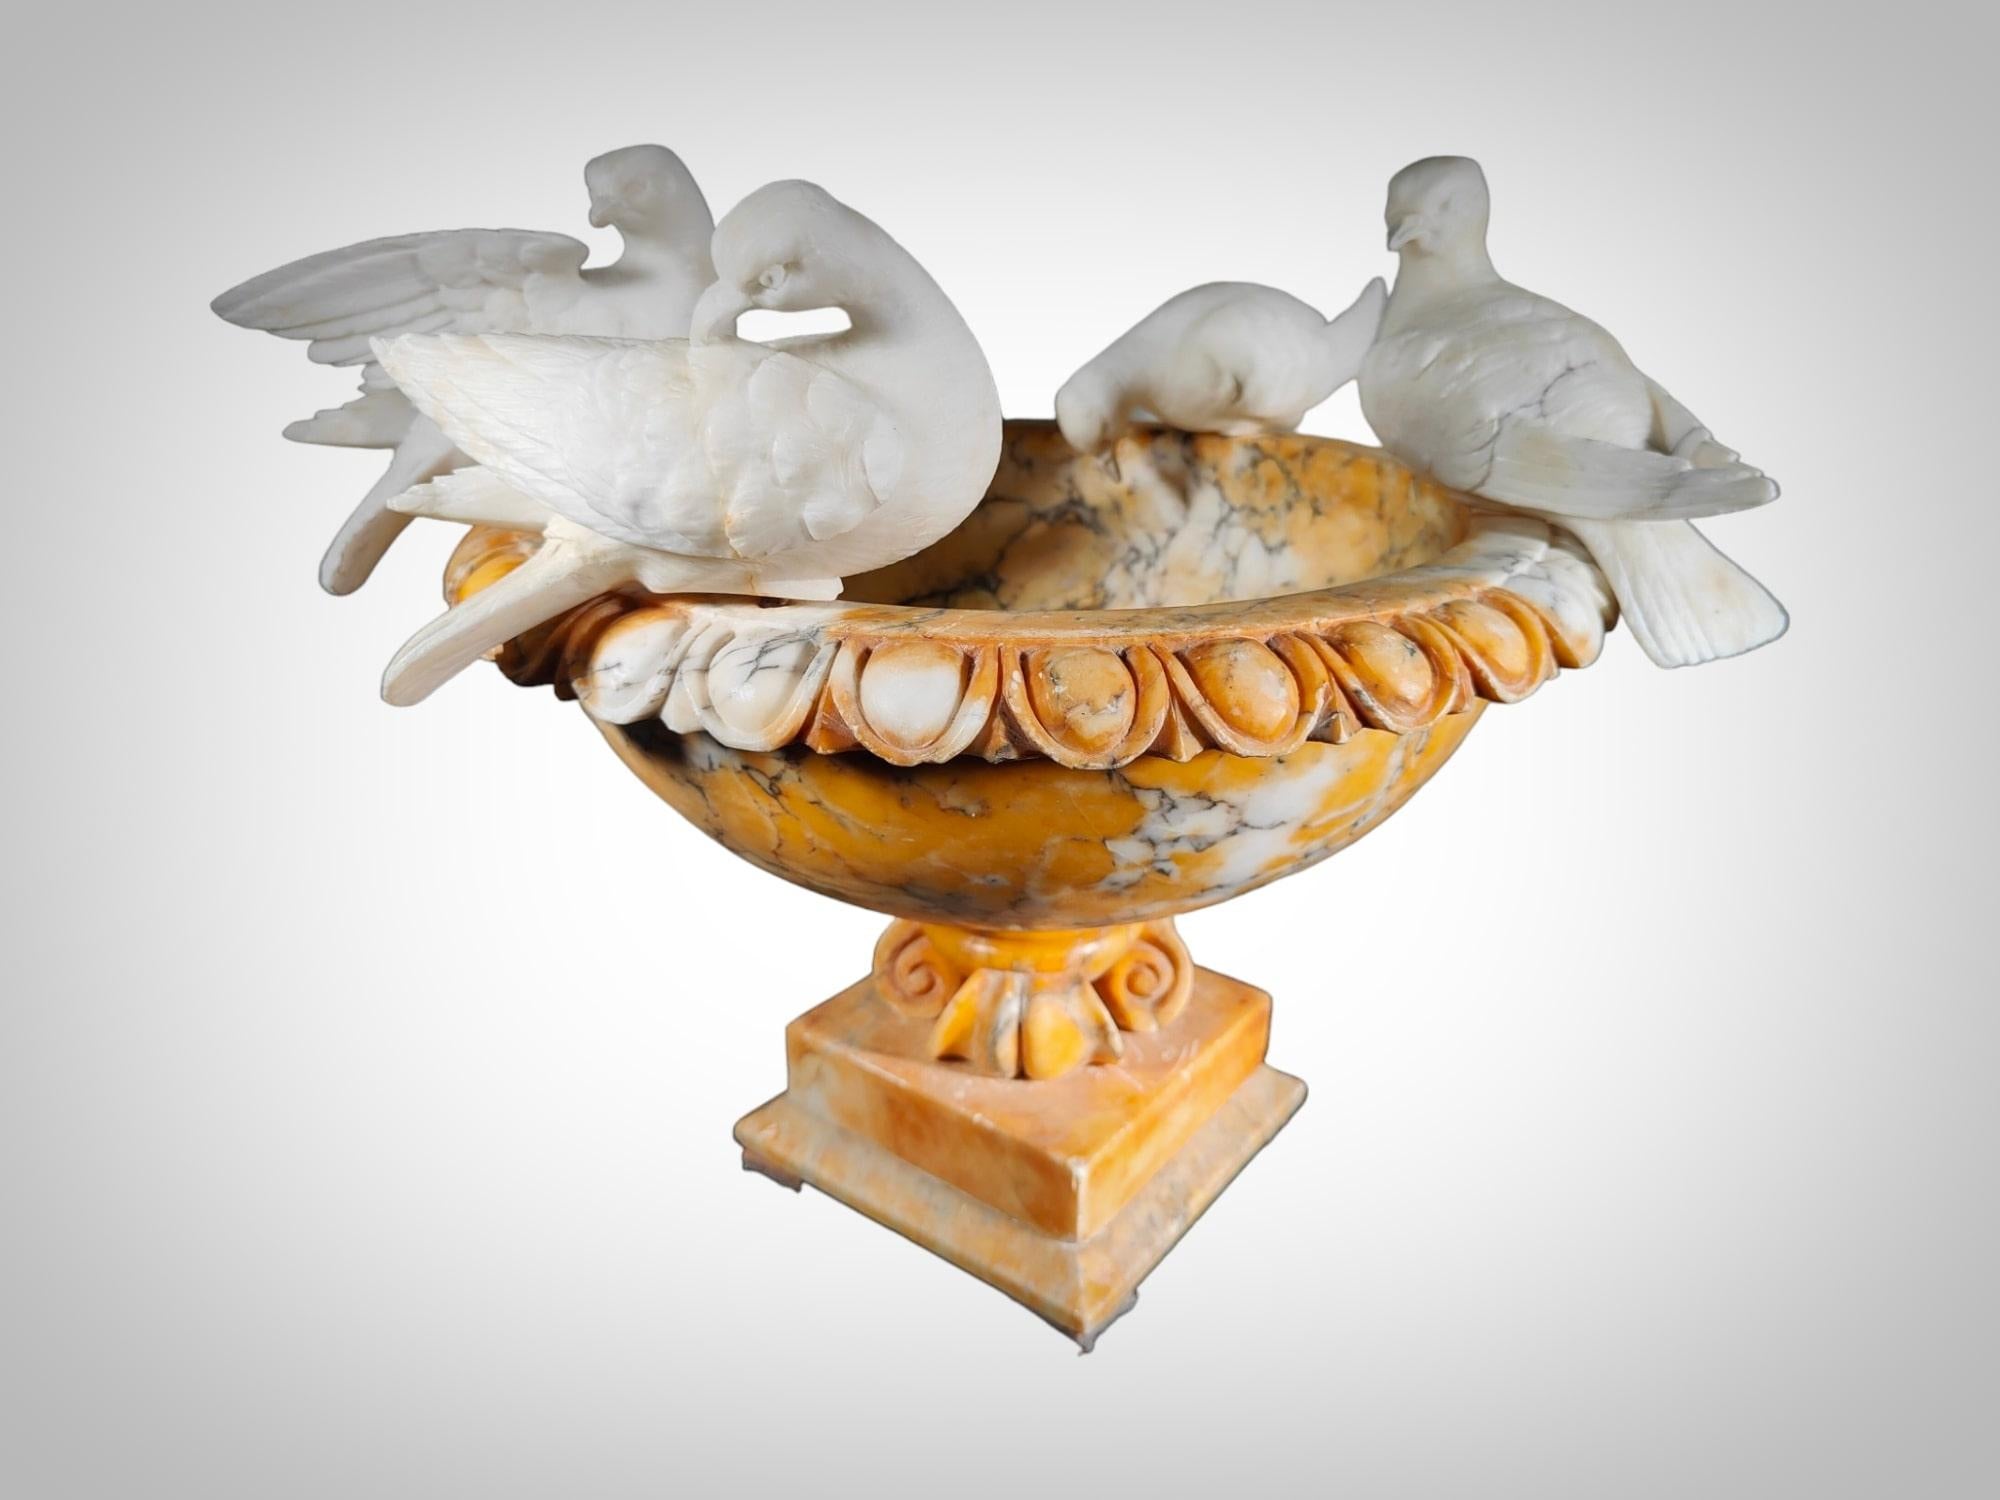 Embark on a journey through time with this majestic Italian marble fountain or centerpiece from the 19th century. Every meticulous detail speaks of the art and craftsmanship of an era that has endured in its elegance. On the rim, four removable